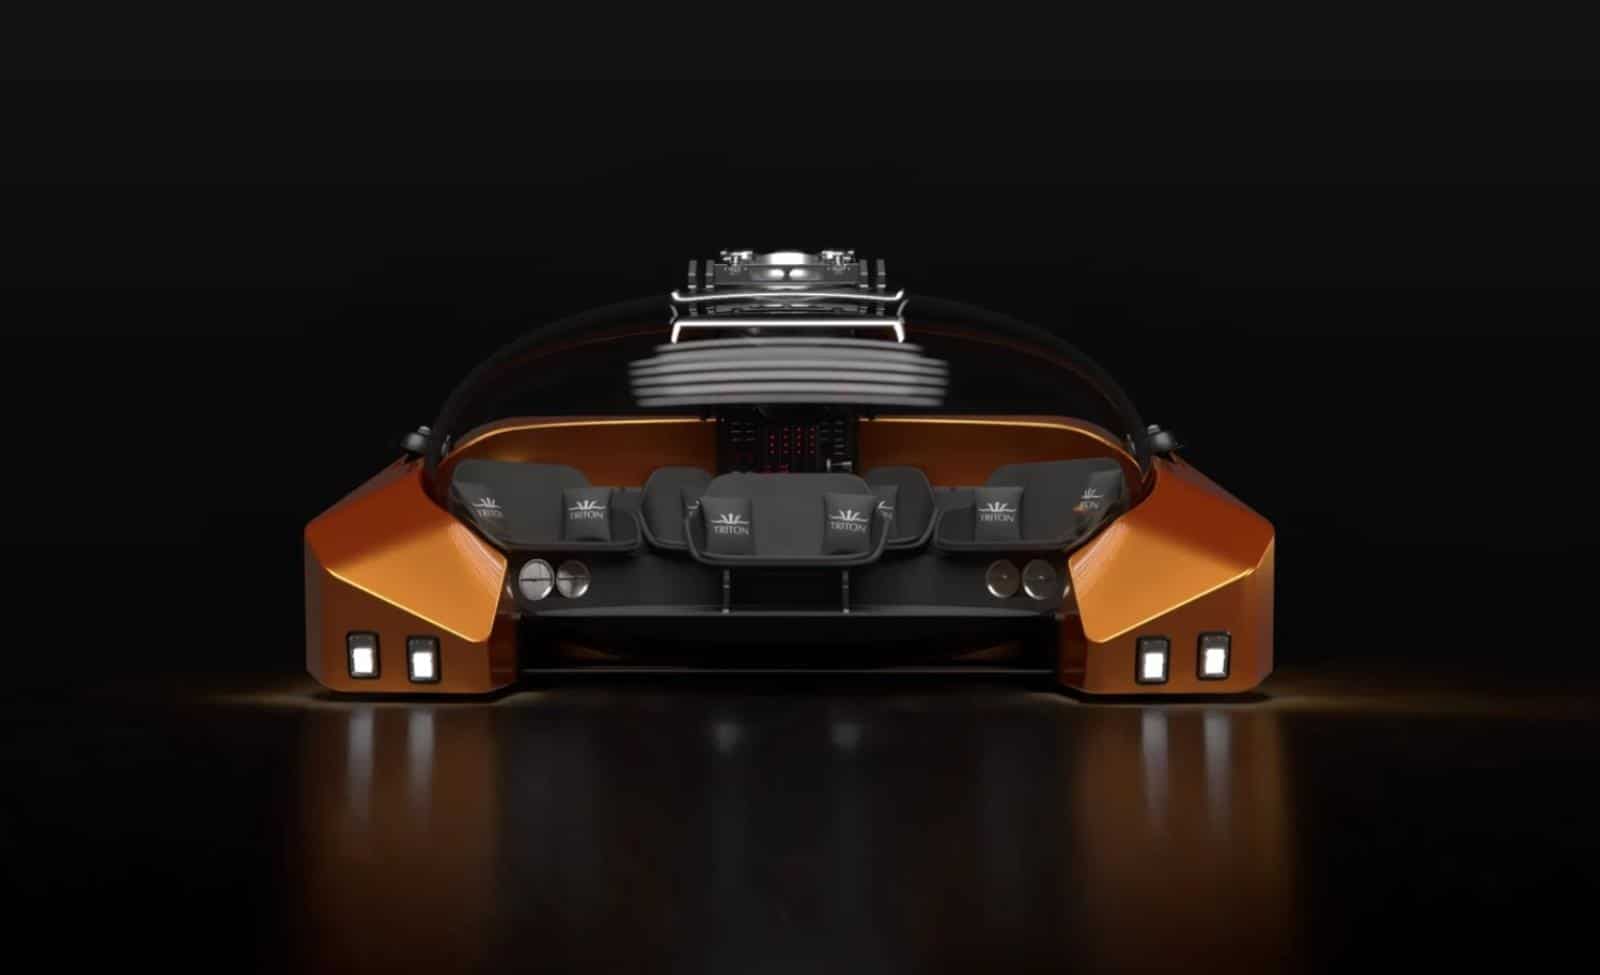 The Triton 660 AVA is reportedly the first such luxury submarine in the world